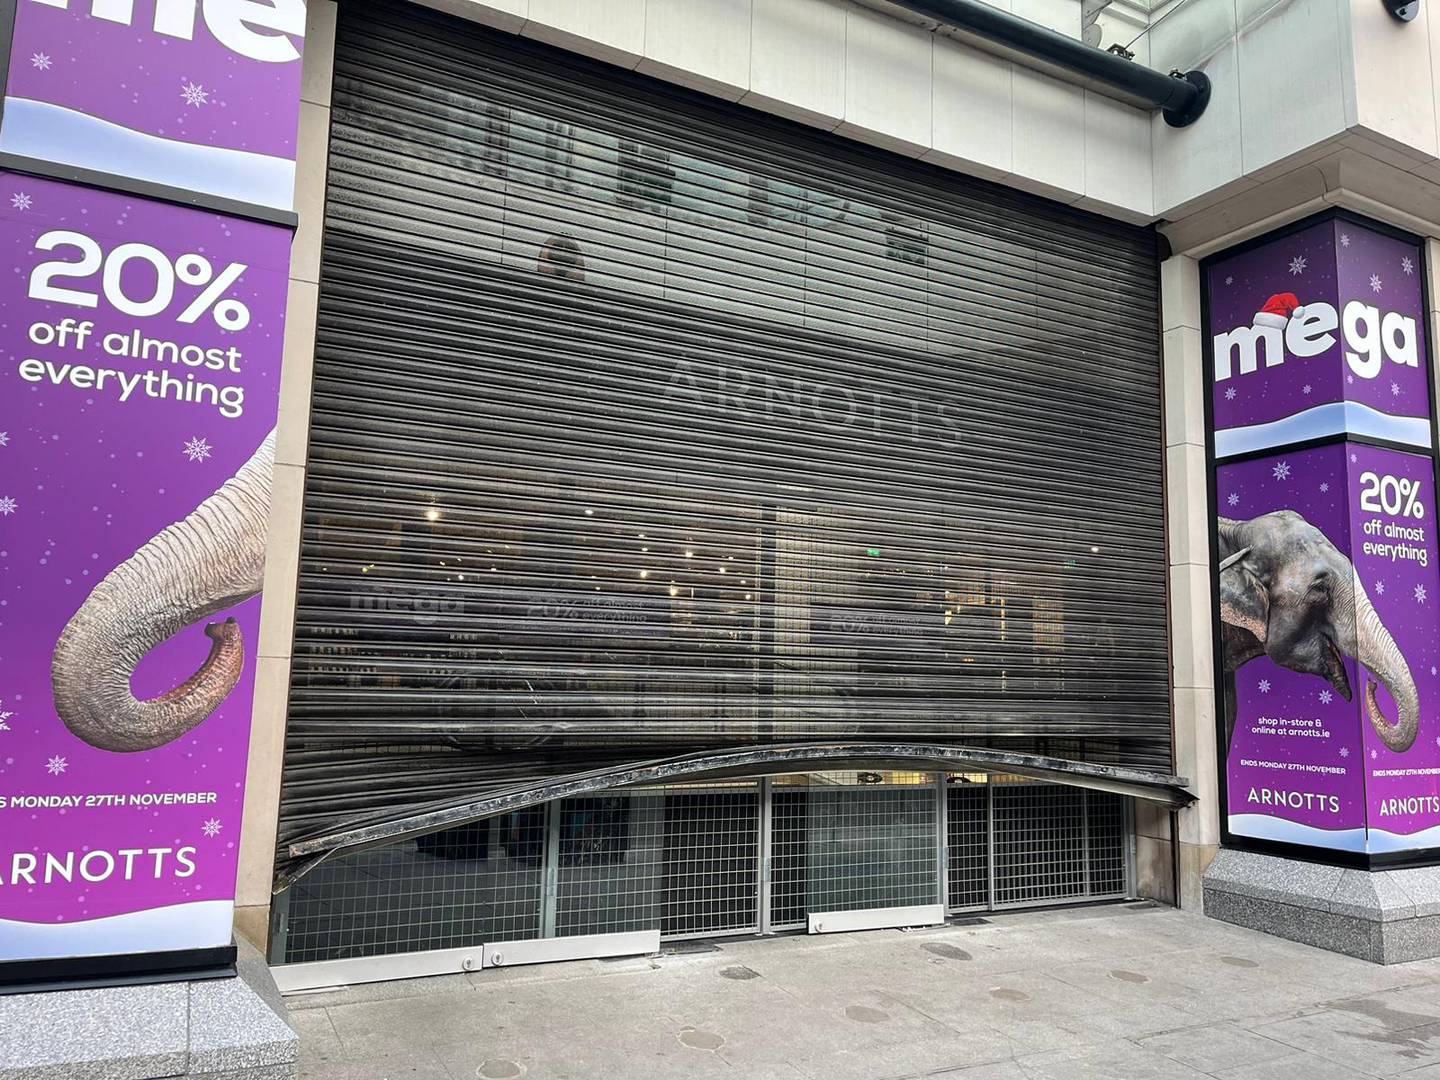 Shops damaged in rioting and looting in Dublin city centre on Thursday pictured on Friday morning. Photograph: Conor Pope